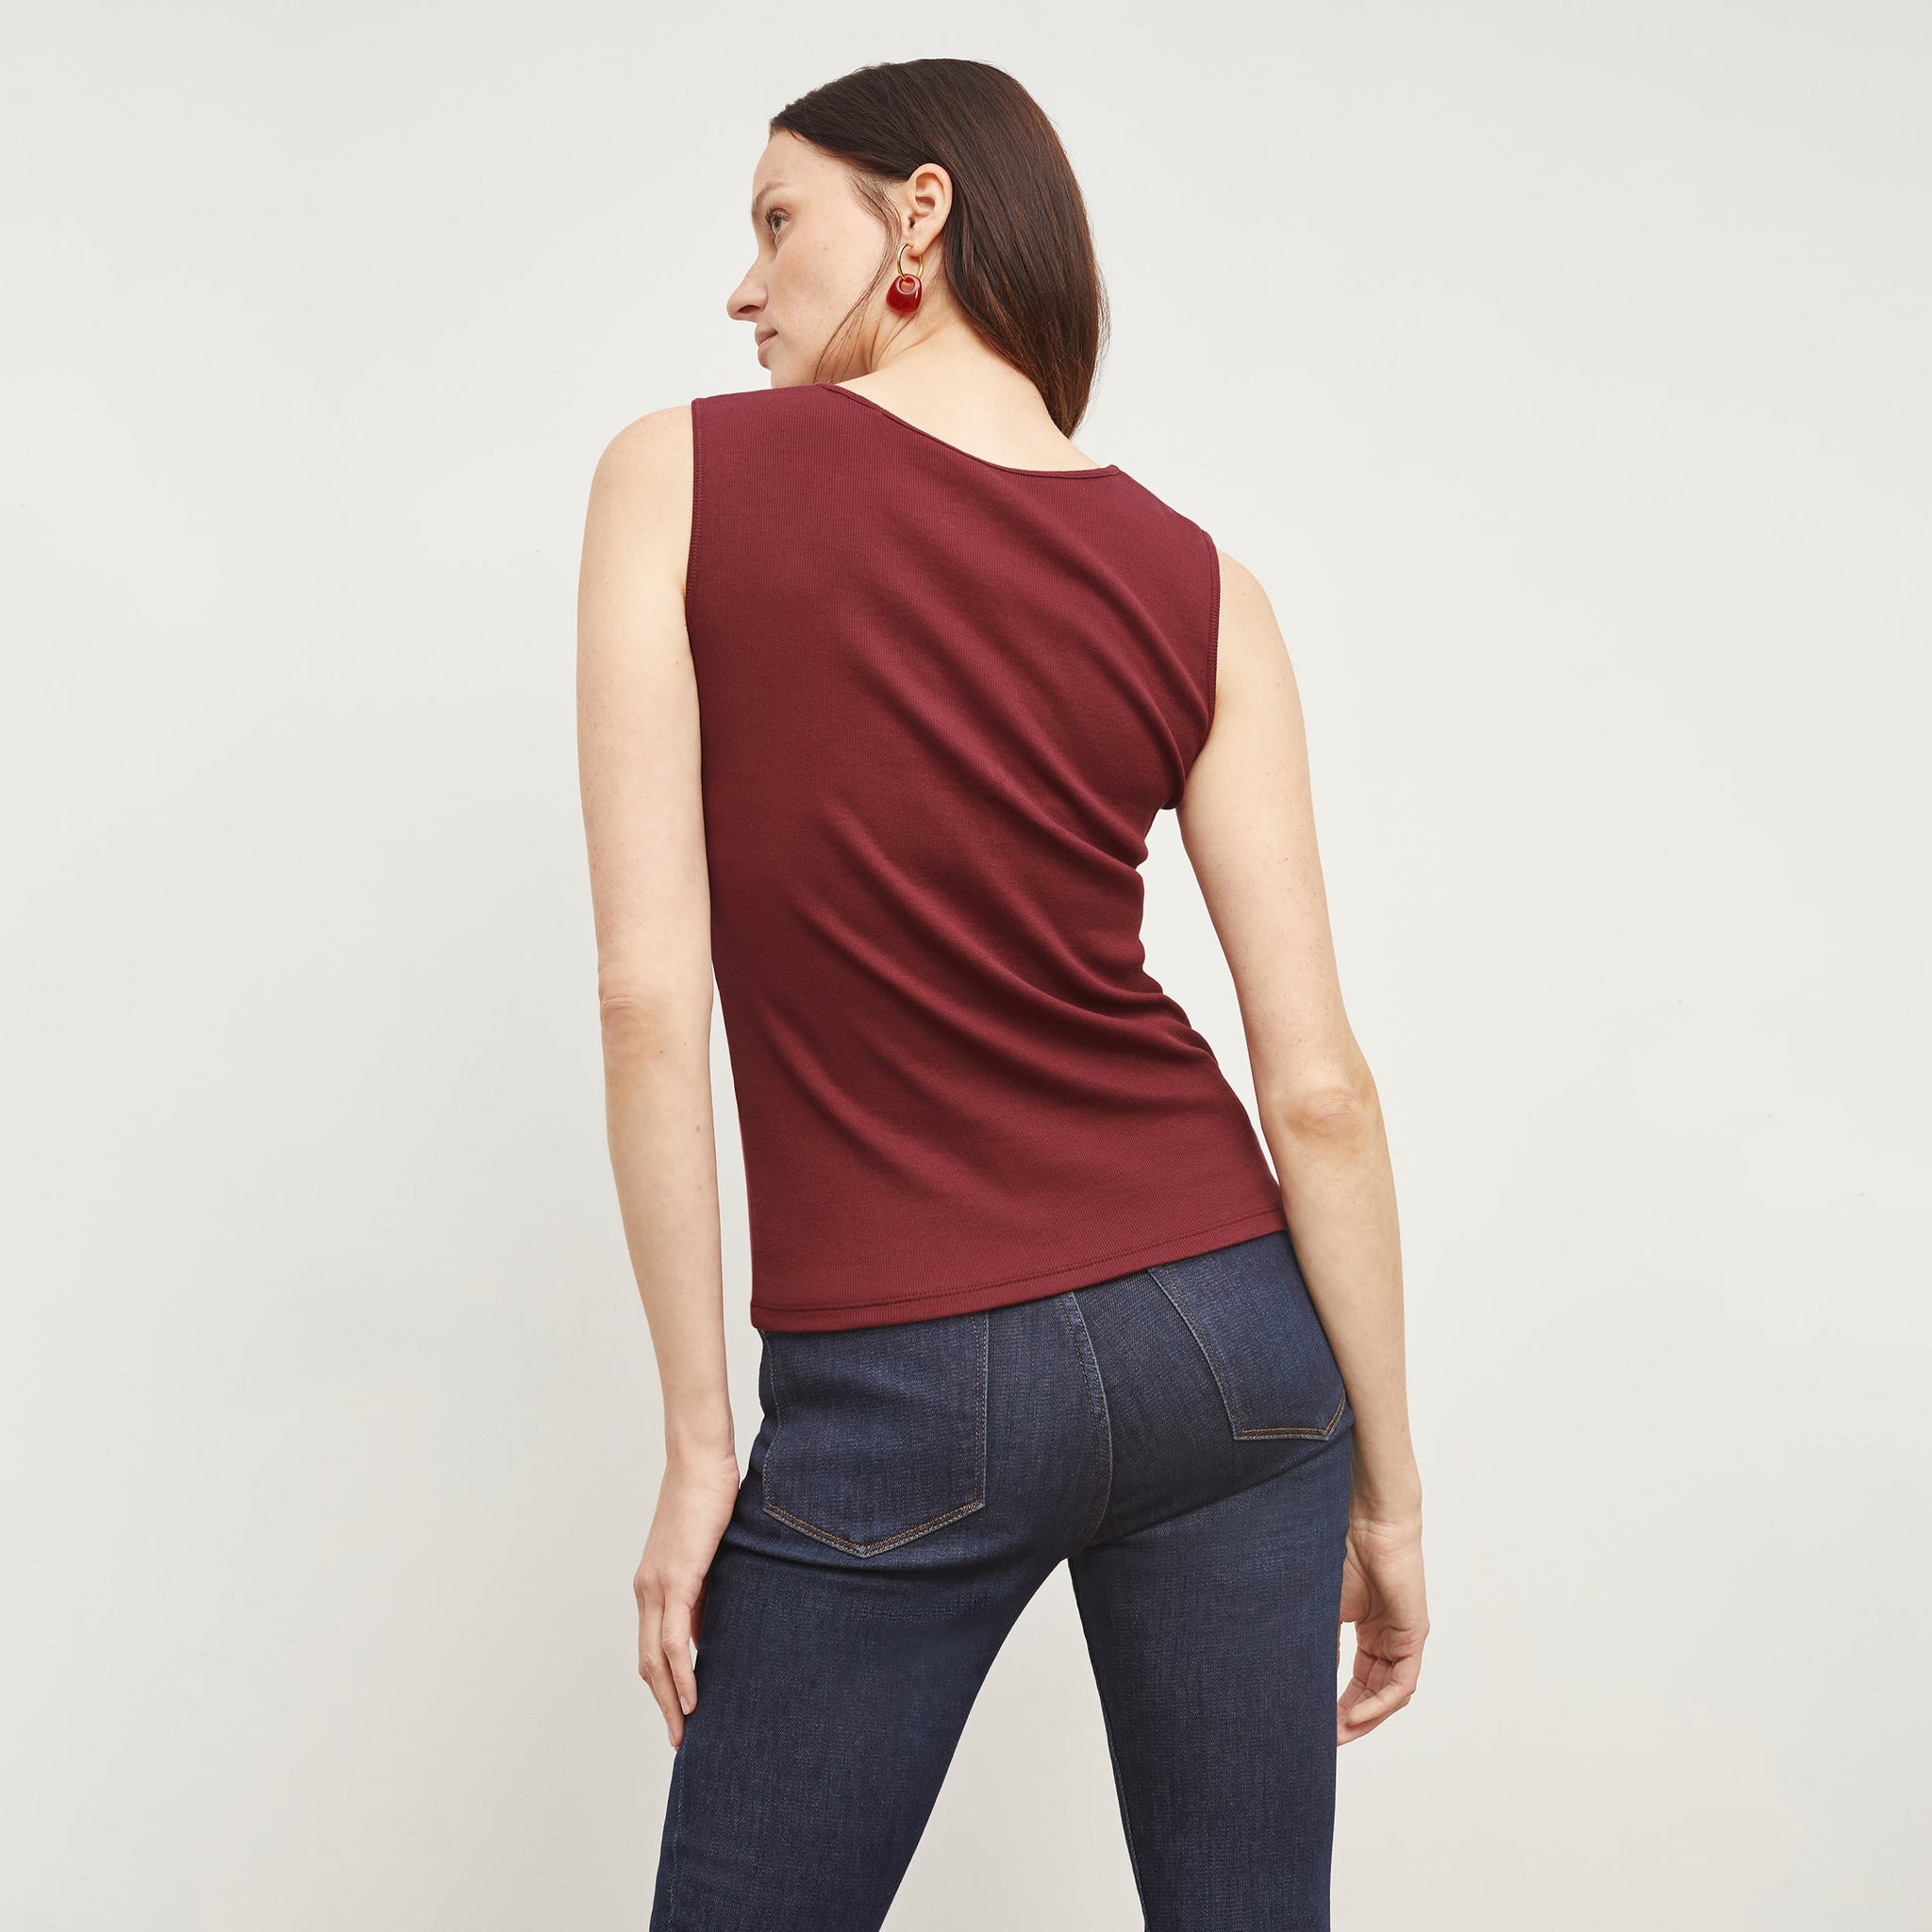 Back image of a woman wearing the Paige Top in Cranberry